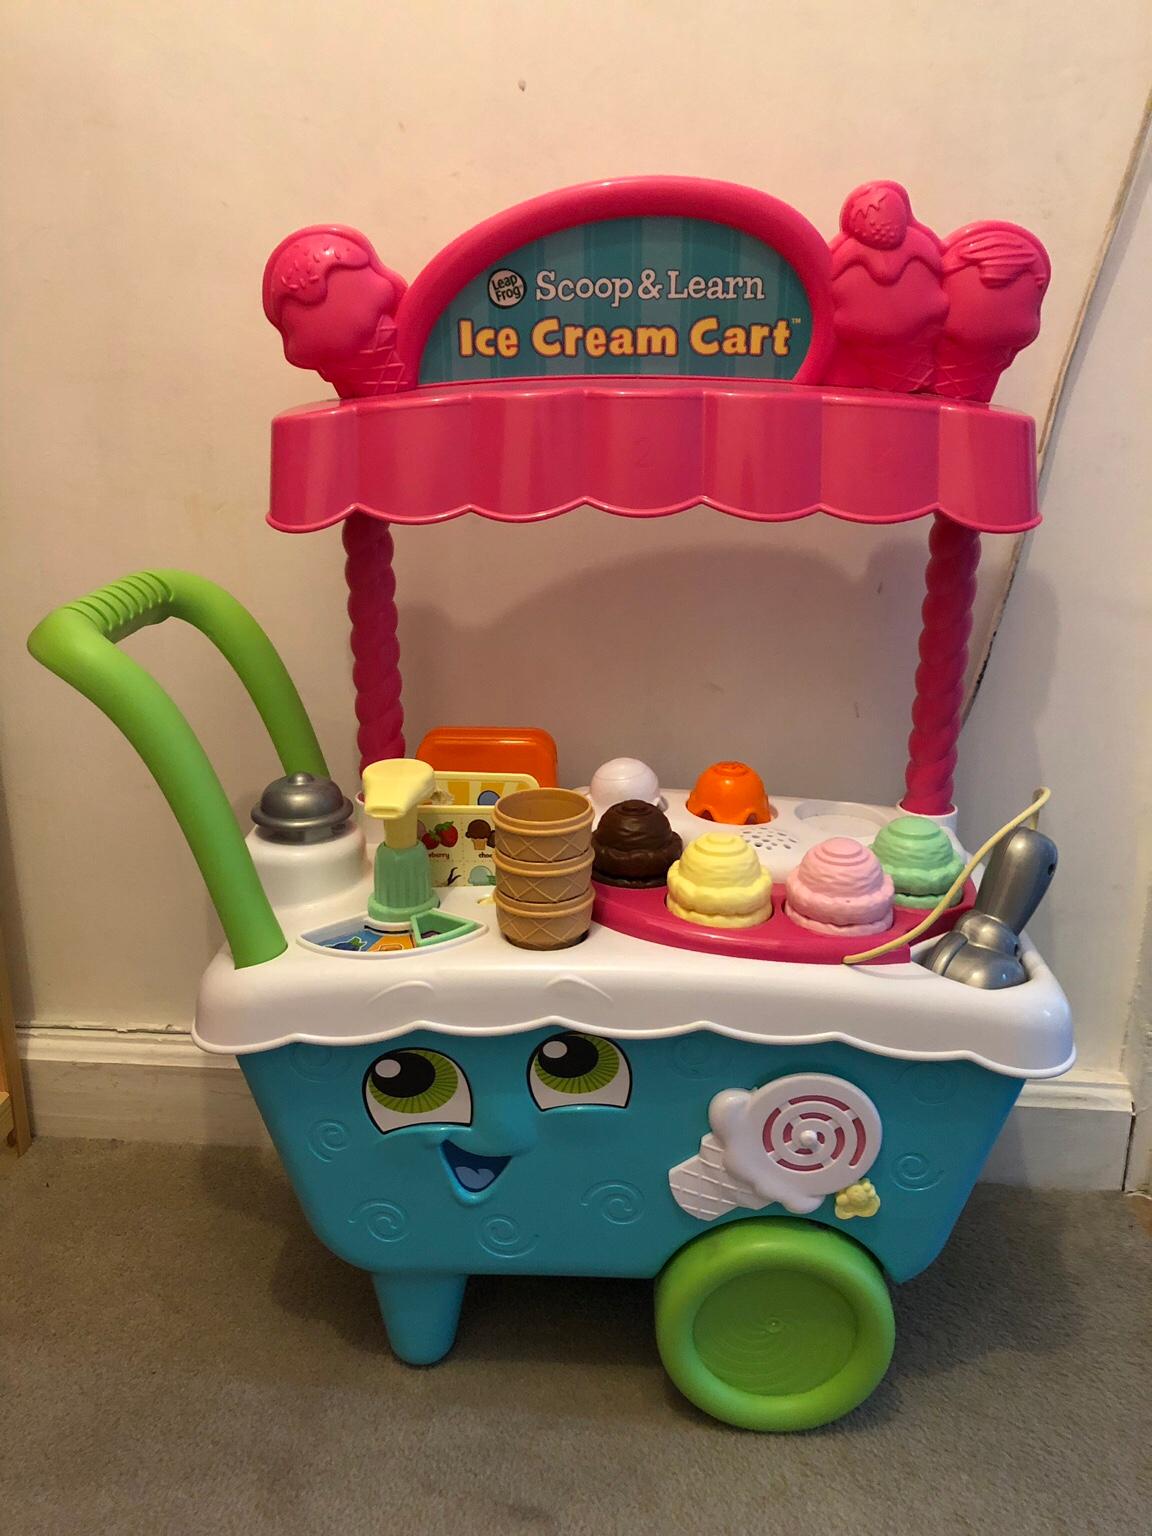 scoop & learn ice cream cart by leapfrog